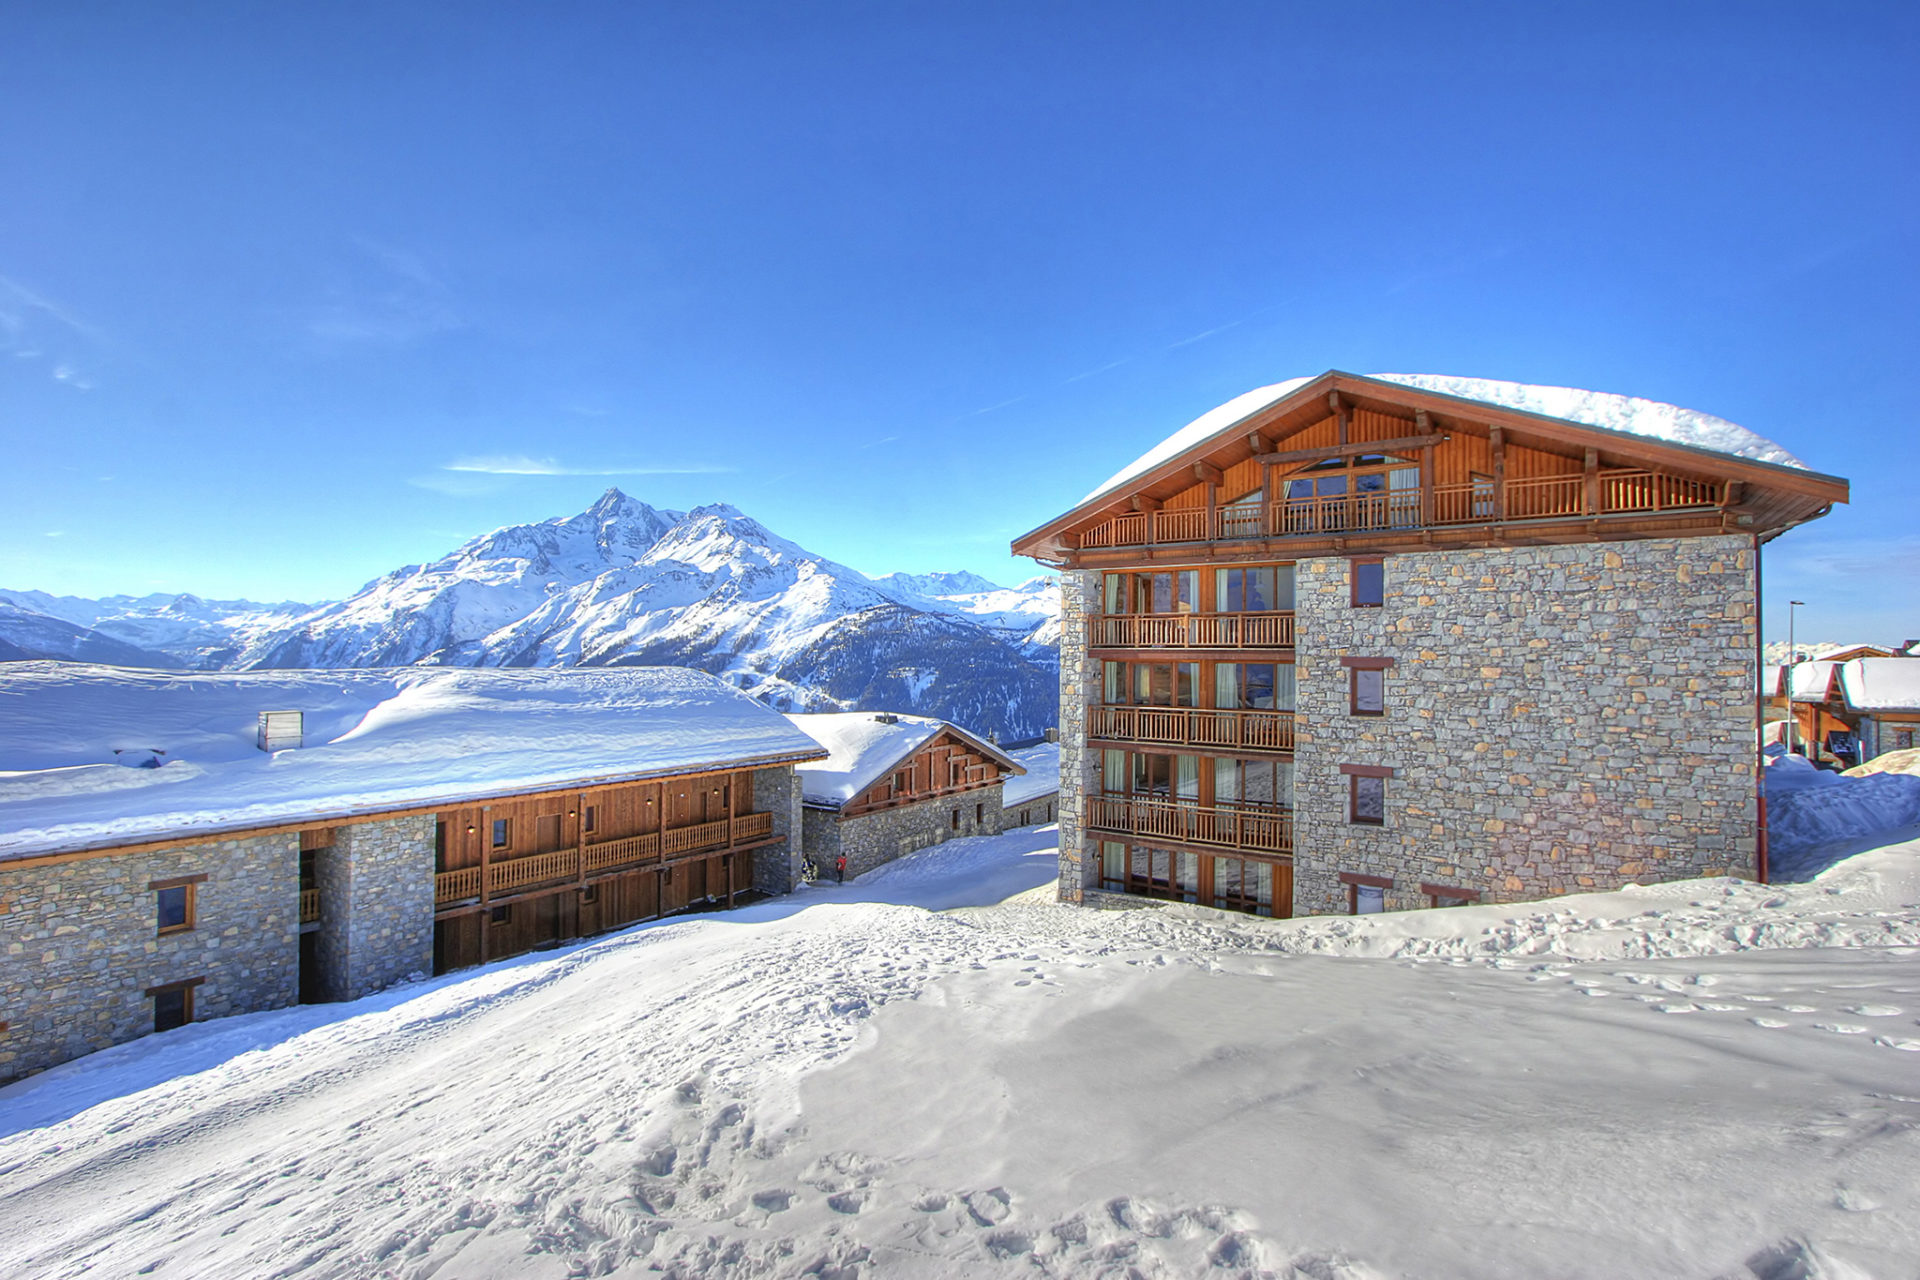 An image of the exterior of Les Balcons de la Rosiere in the daytime